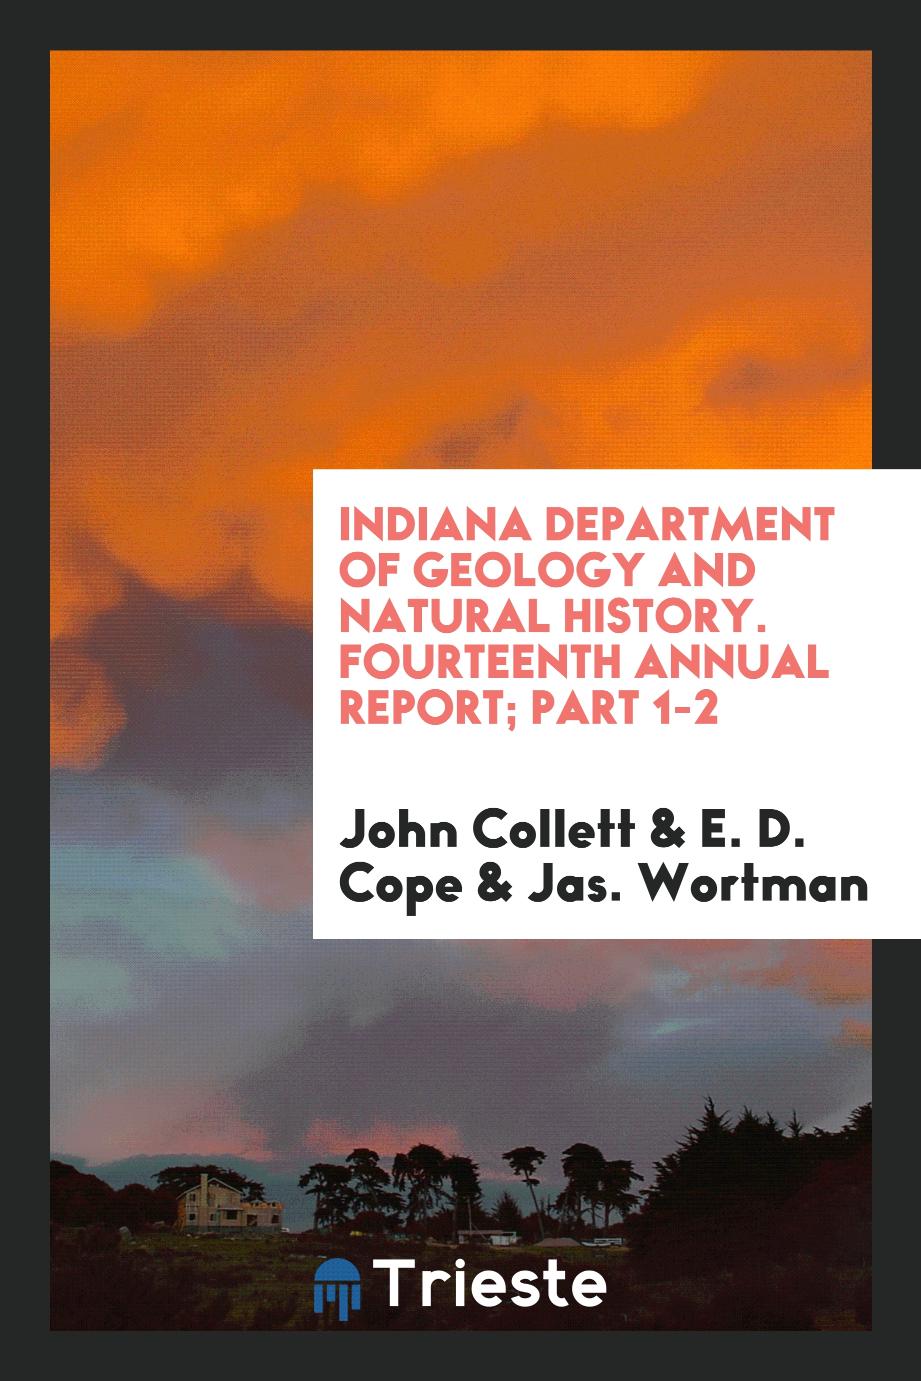 Indiana Department of Geology and Natural History. Fourteenth Annual Report; Part 1-2